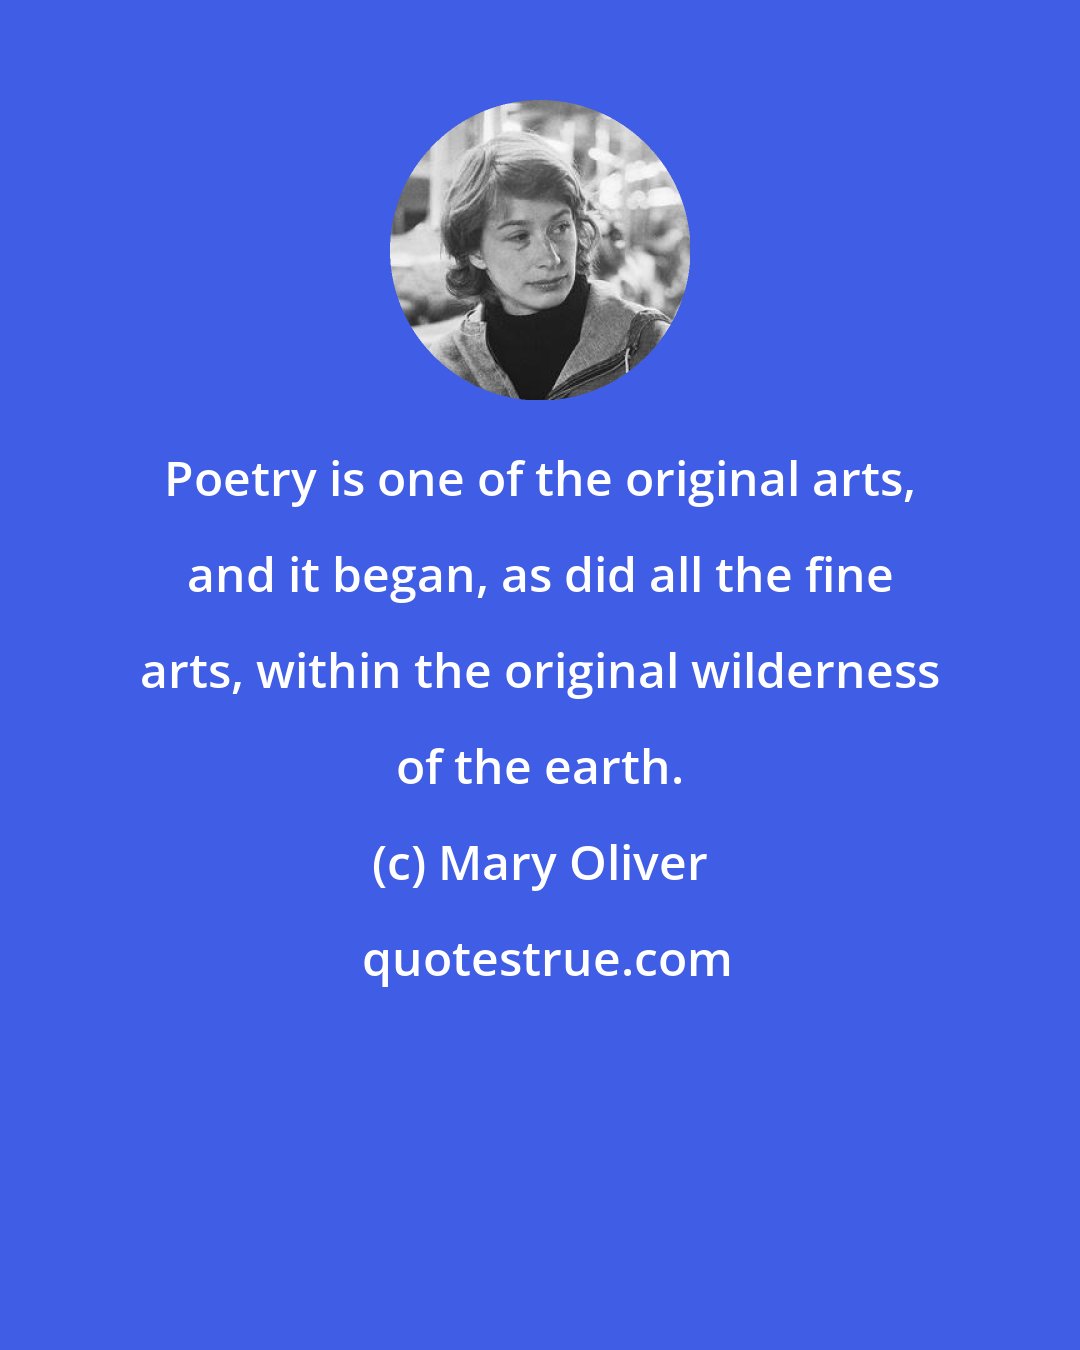 Mary Oliver: Poetry is one of the original arts, and it began, as did all the fine arts, within the original wilderness of the earth.